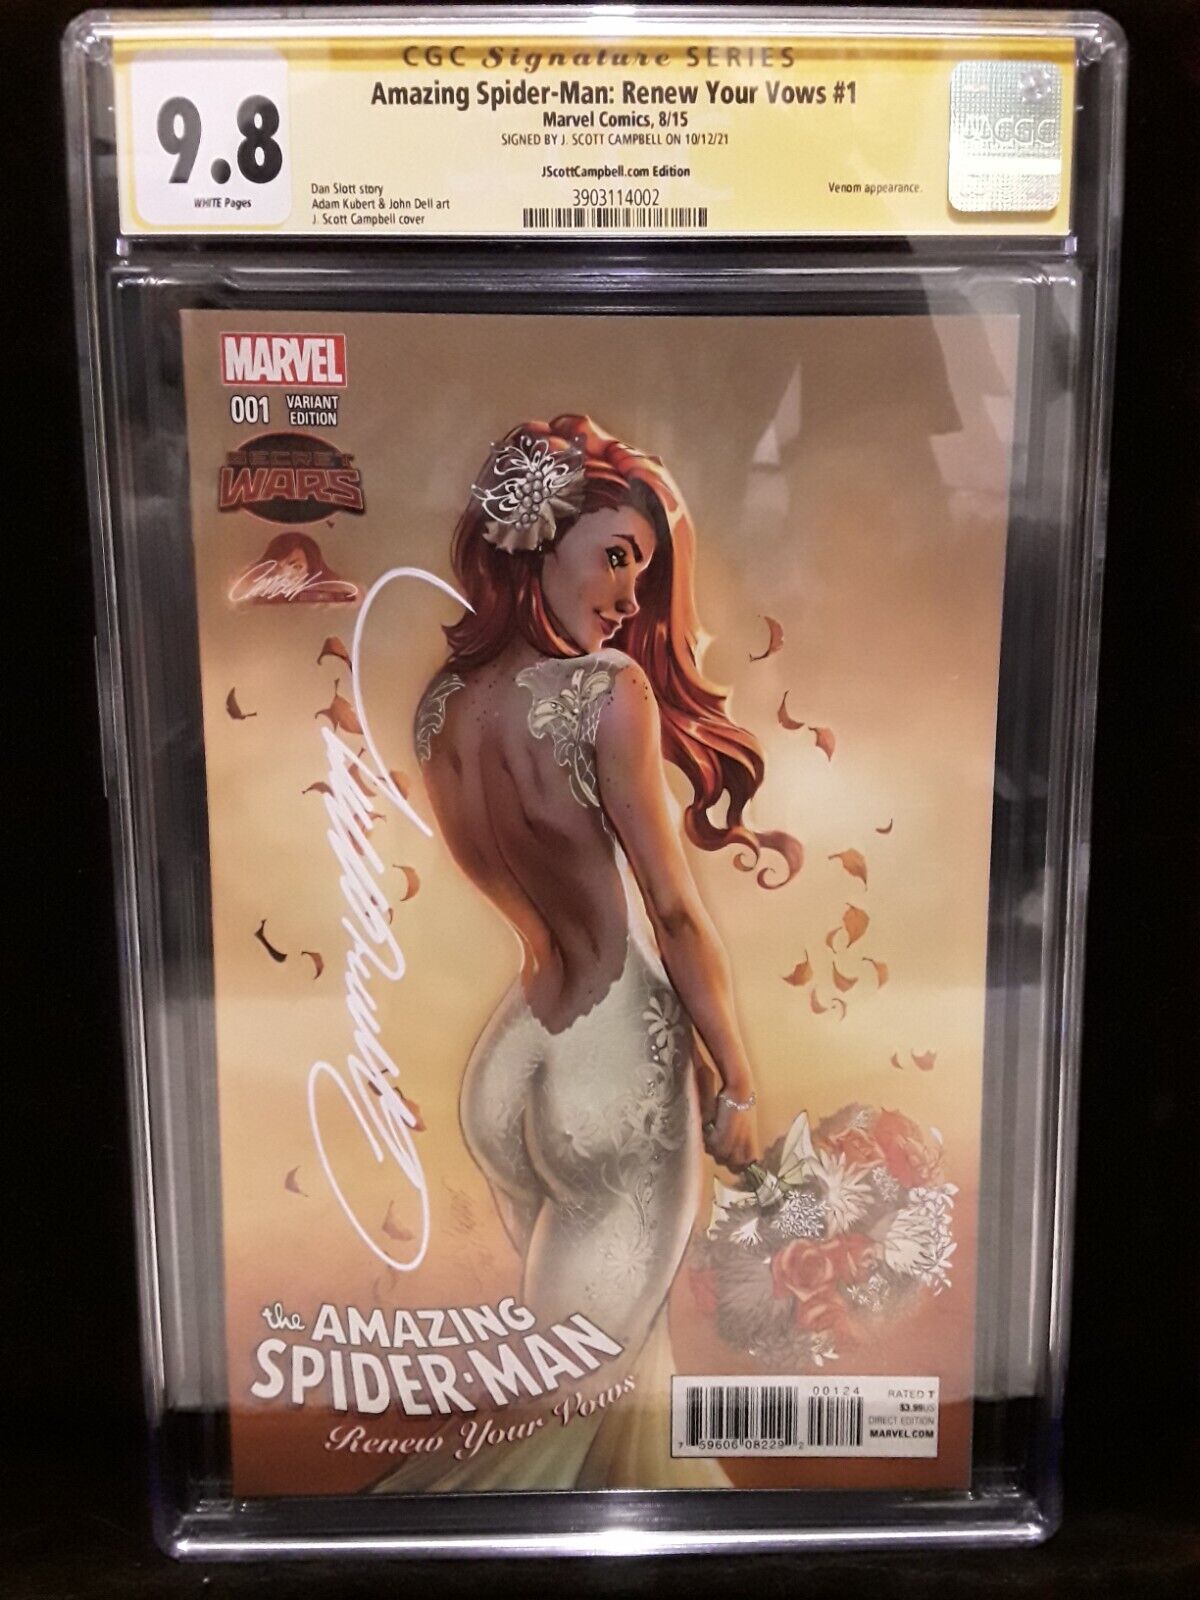 CGC 9.8 AMAZING SPIDER-MAN RENEW YOUR VOWS #1 J SCOTT CAMPBELL VAR. SIGNED SS